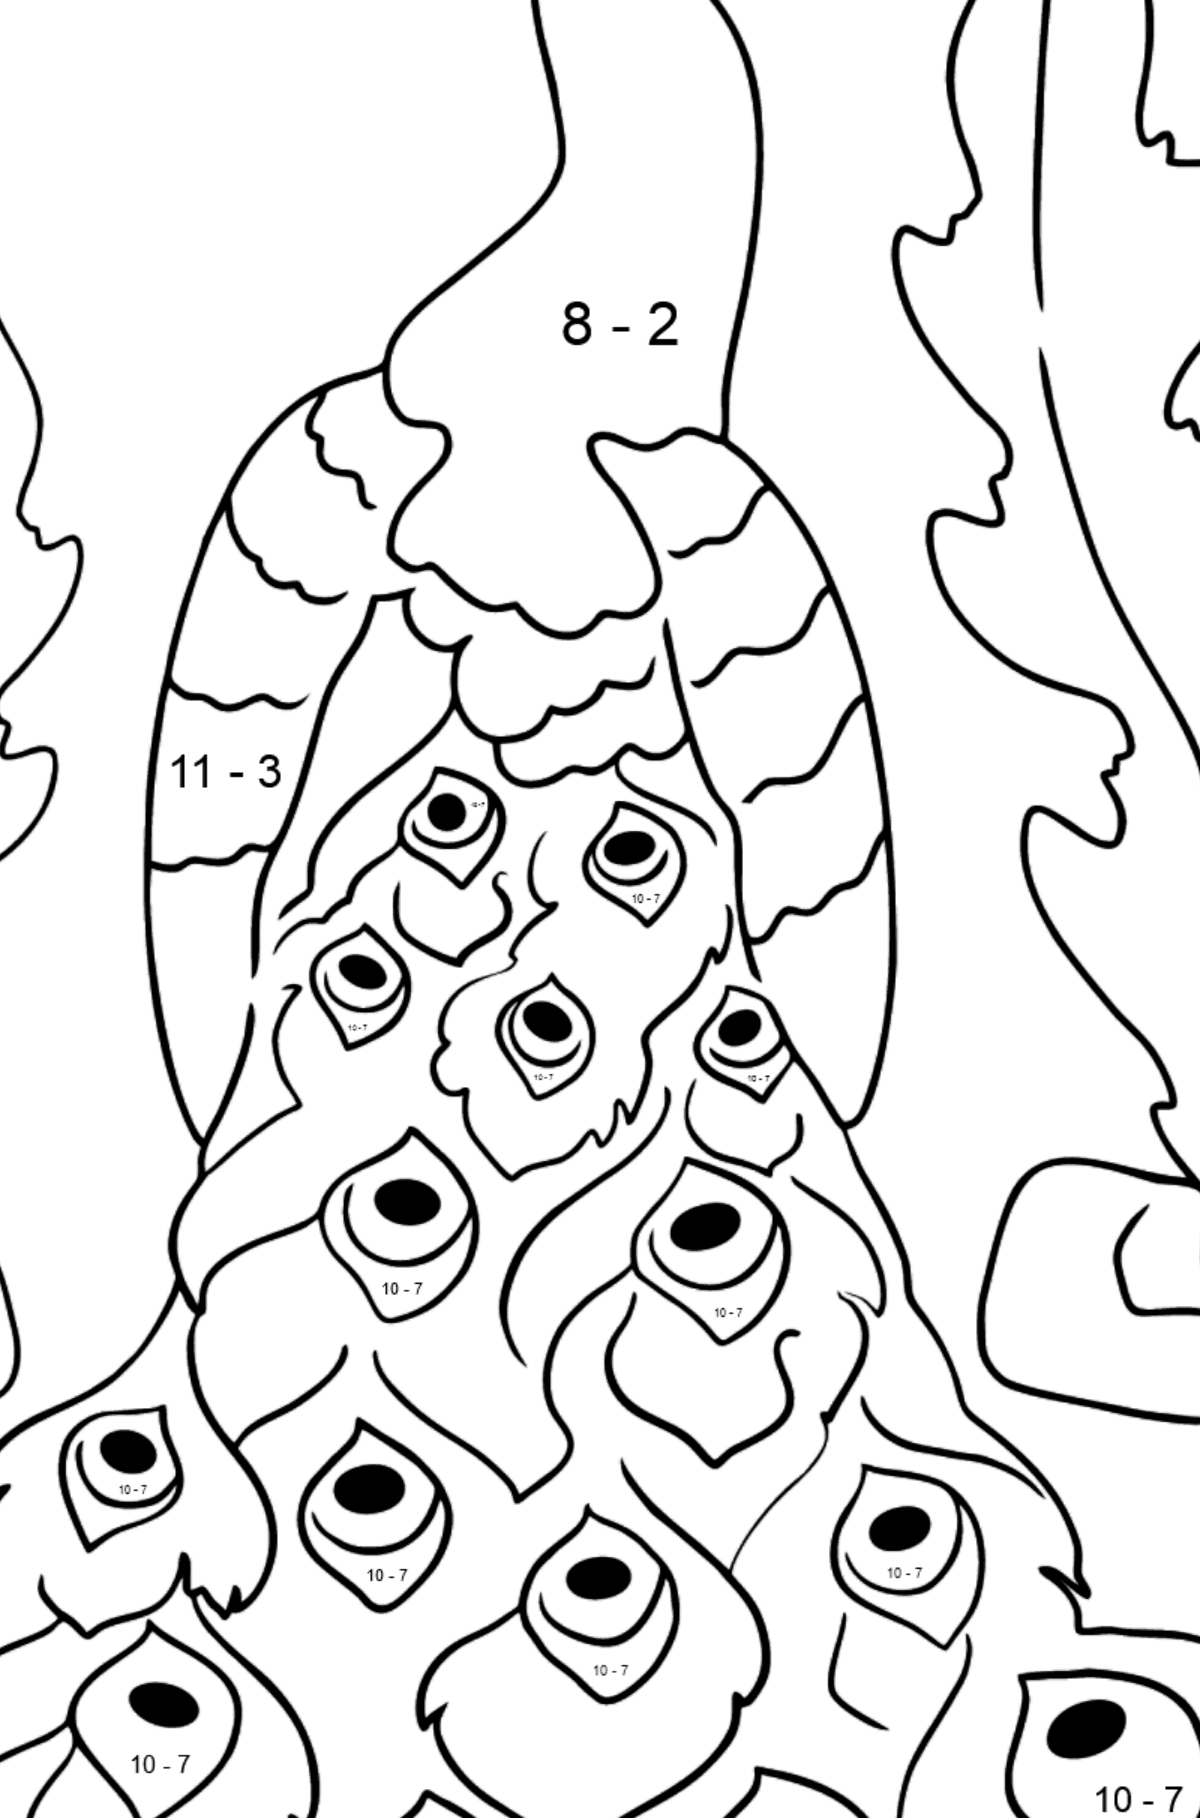 A Pompous and Haughty Peacock Coloring Page - Math Coloring - Subtraction for Kids